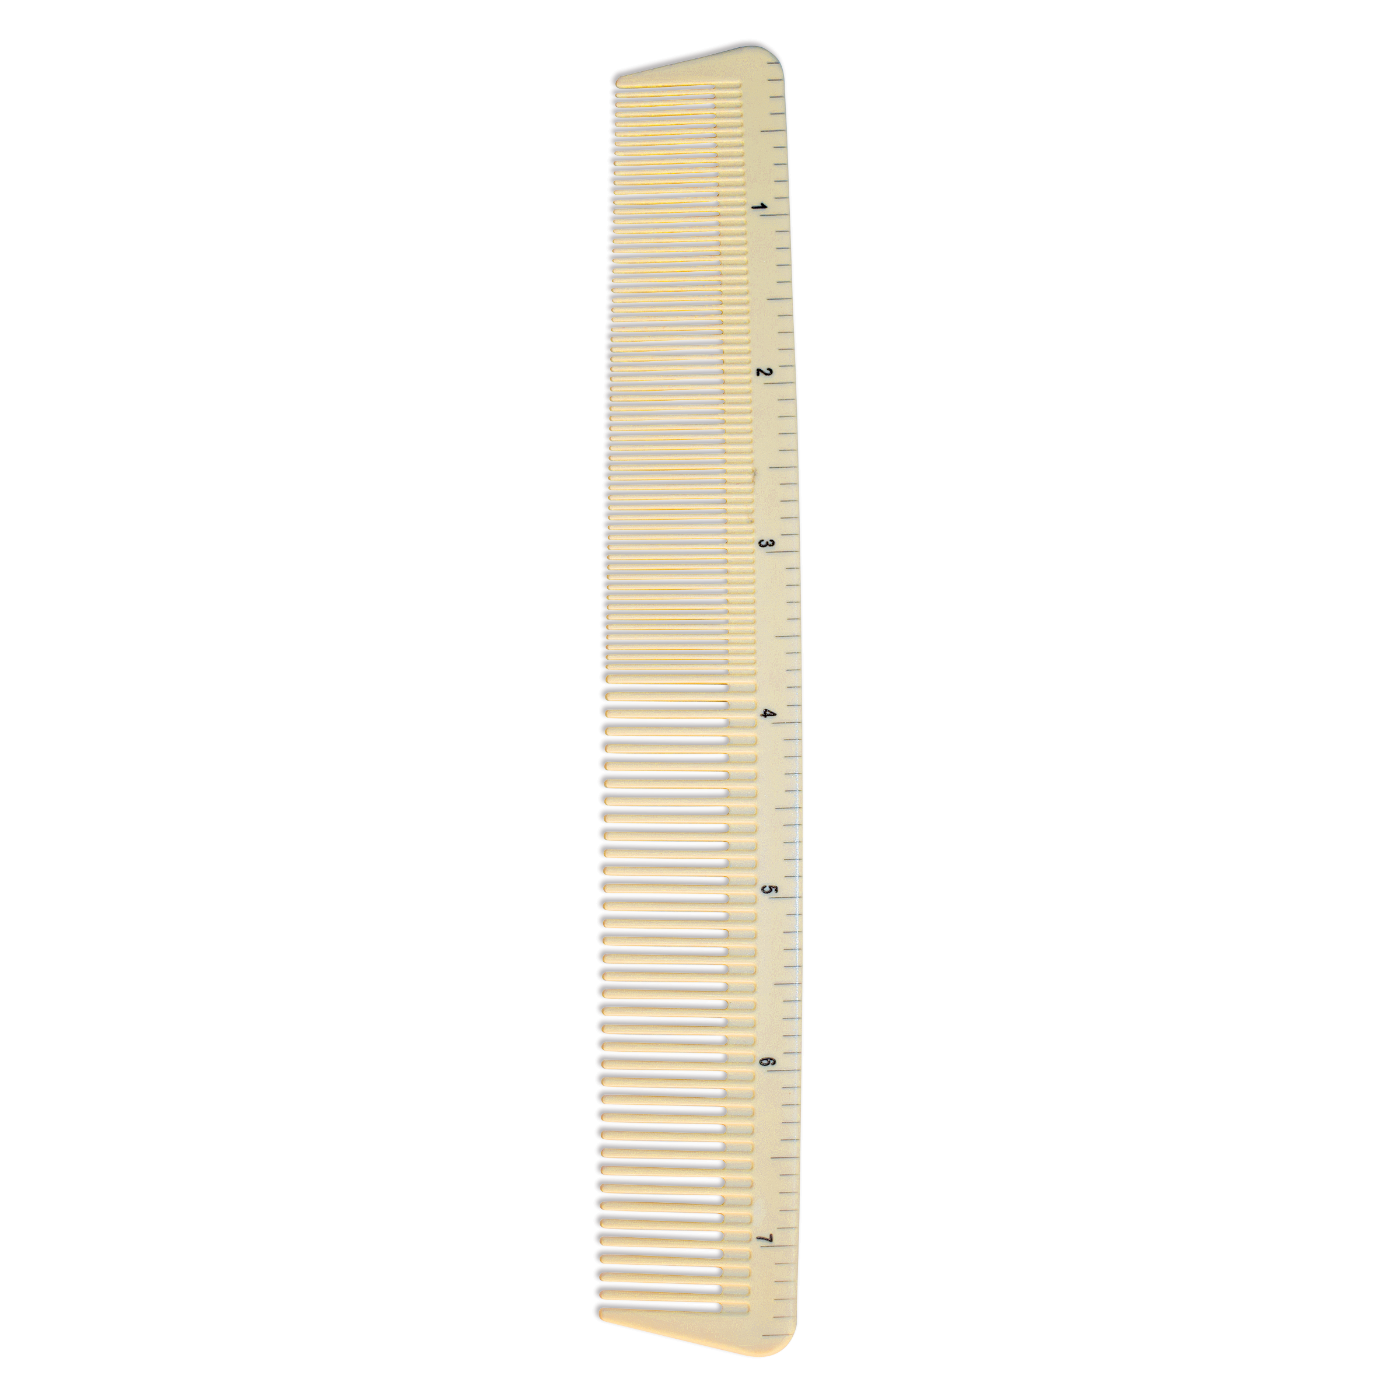 Cutting Comb with Measurement Marks - 7-1/2"